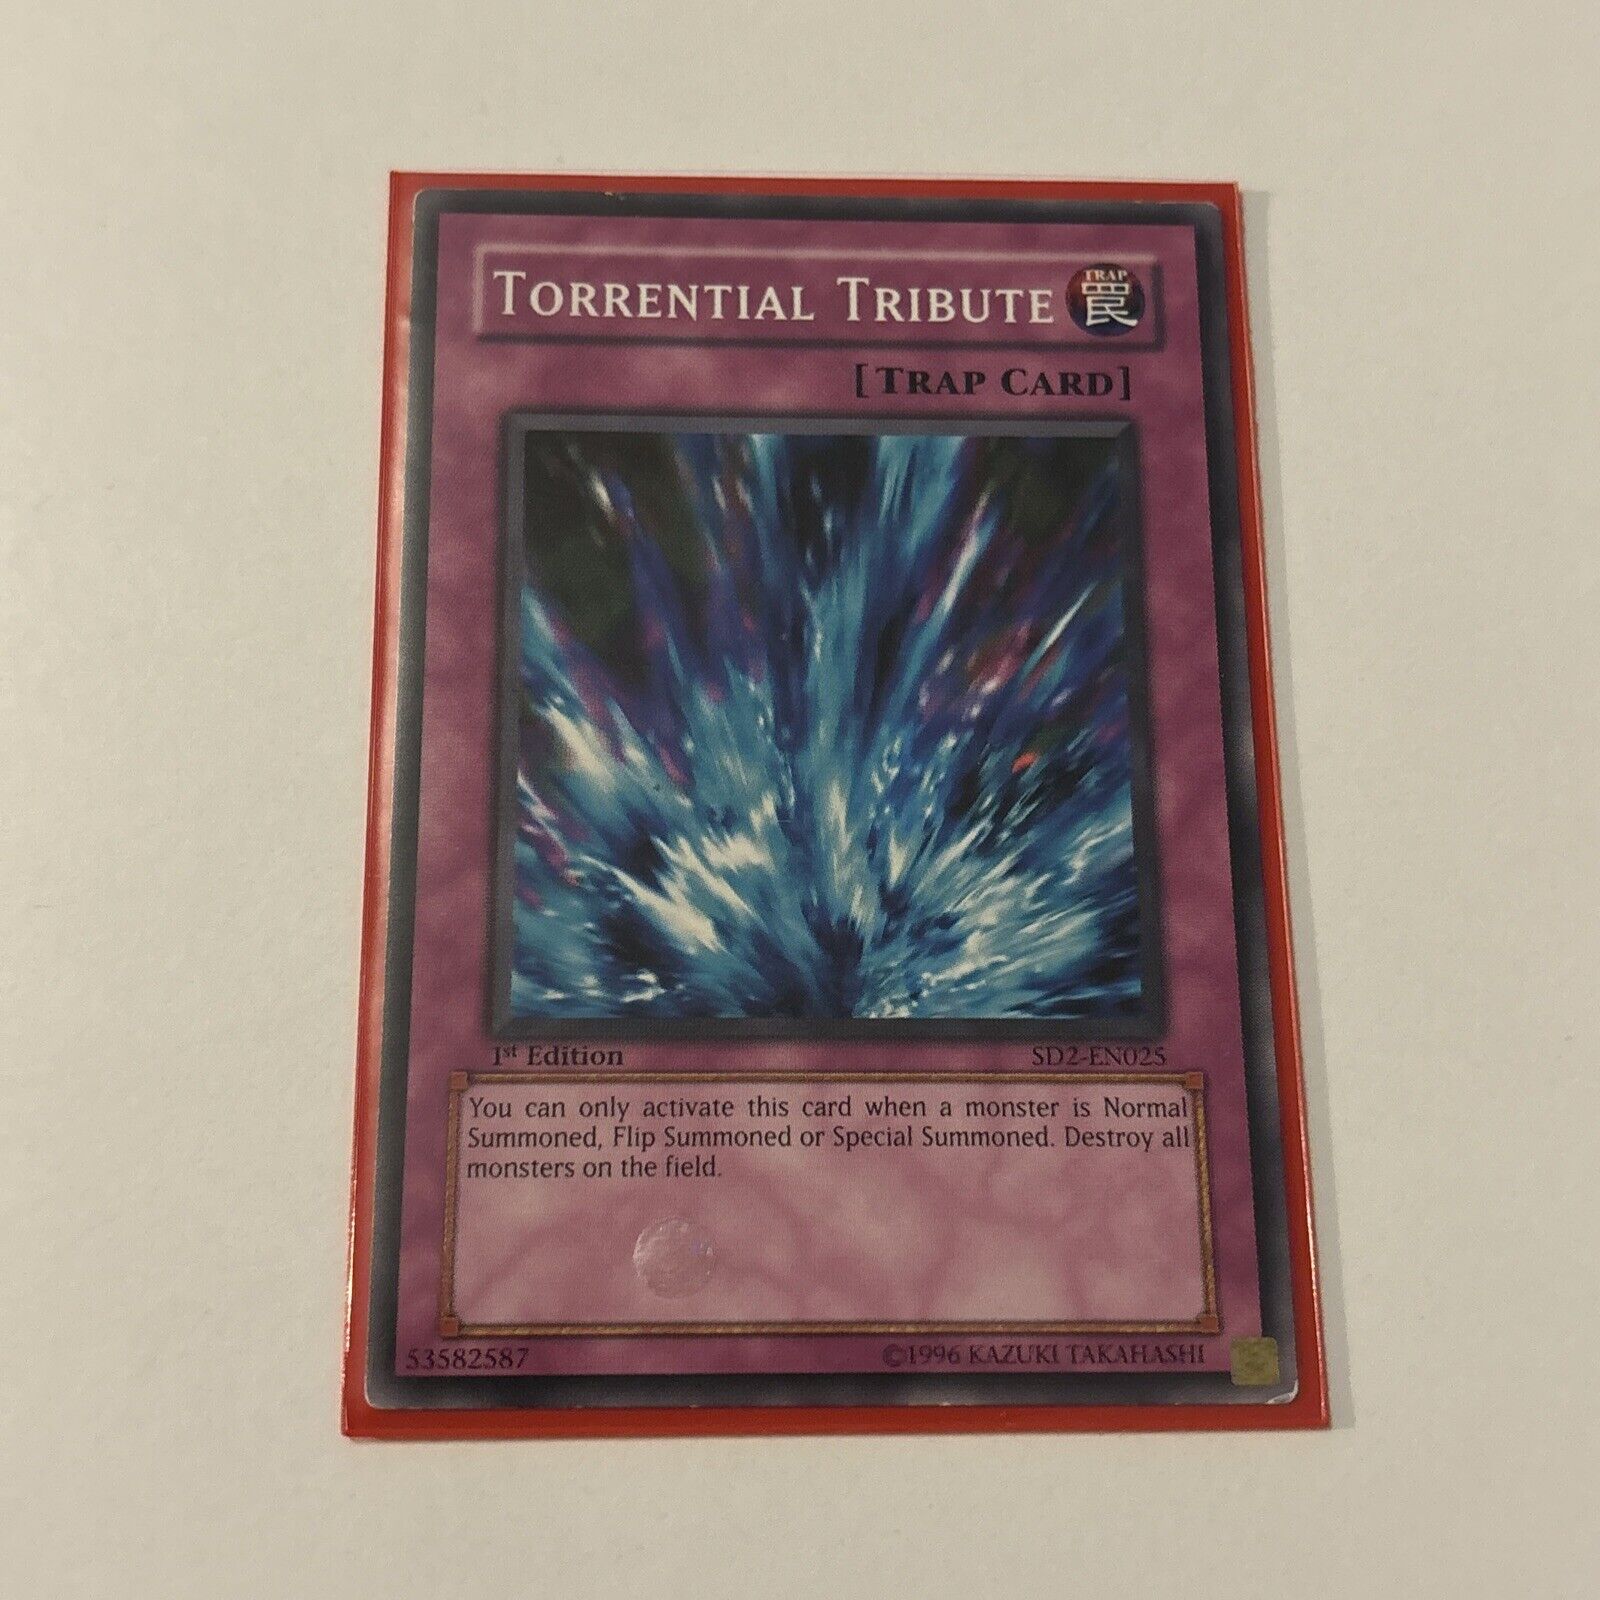 Yu-Gi-Oh TCG: Torrential Tribute SD2-EN025 Common 1st Edition Card LP/NM